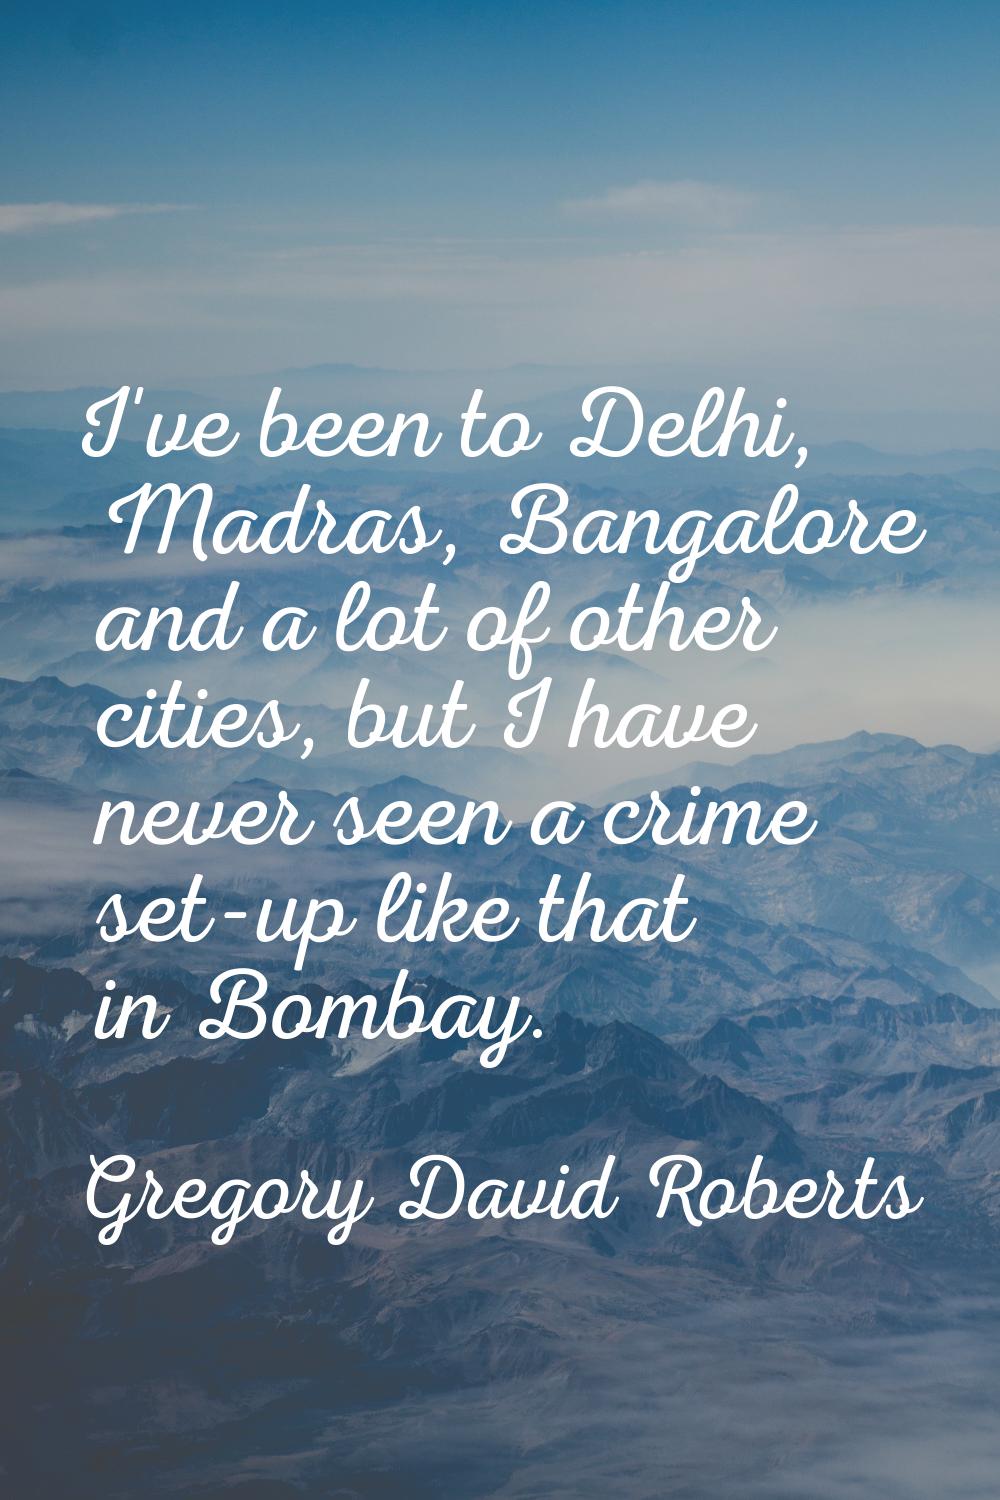 I've been to Delhi, Madras, Bangalore and a lot of other cities, but I have never seen a crime set-